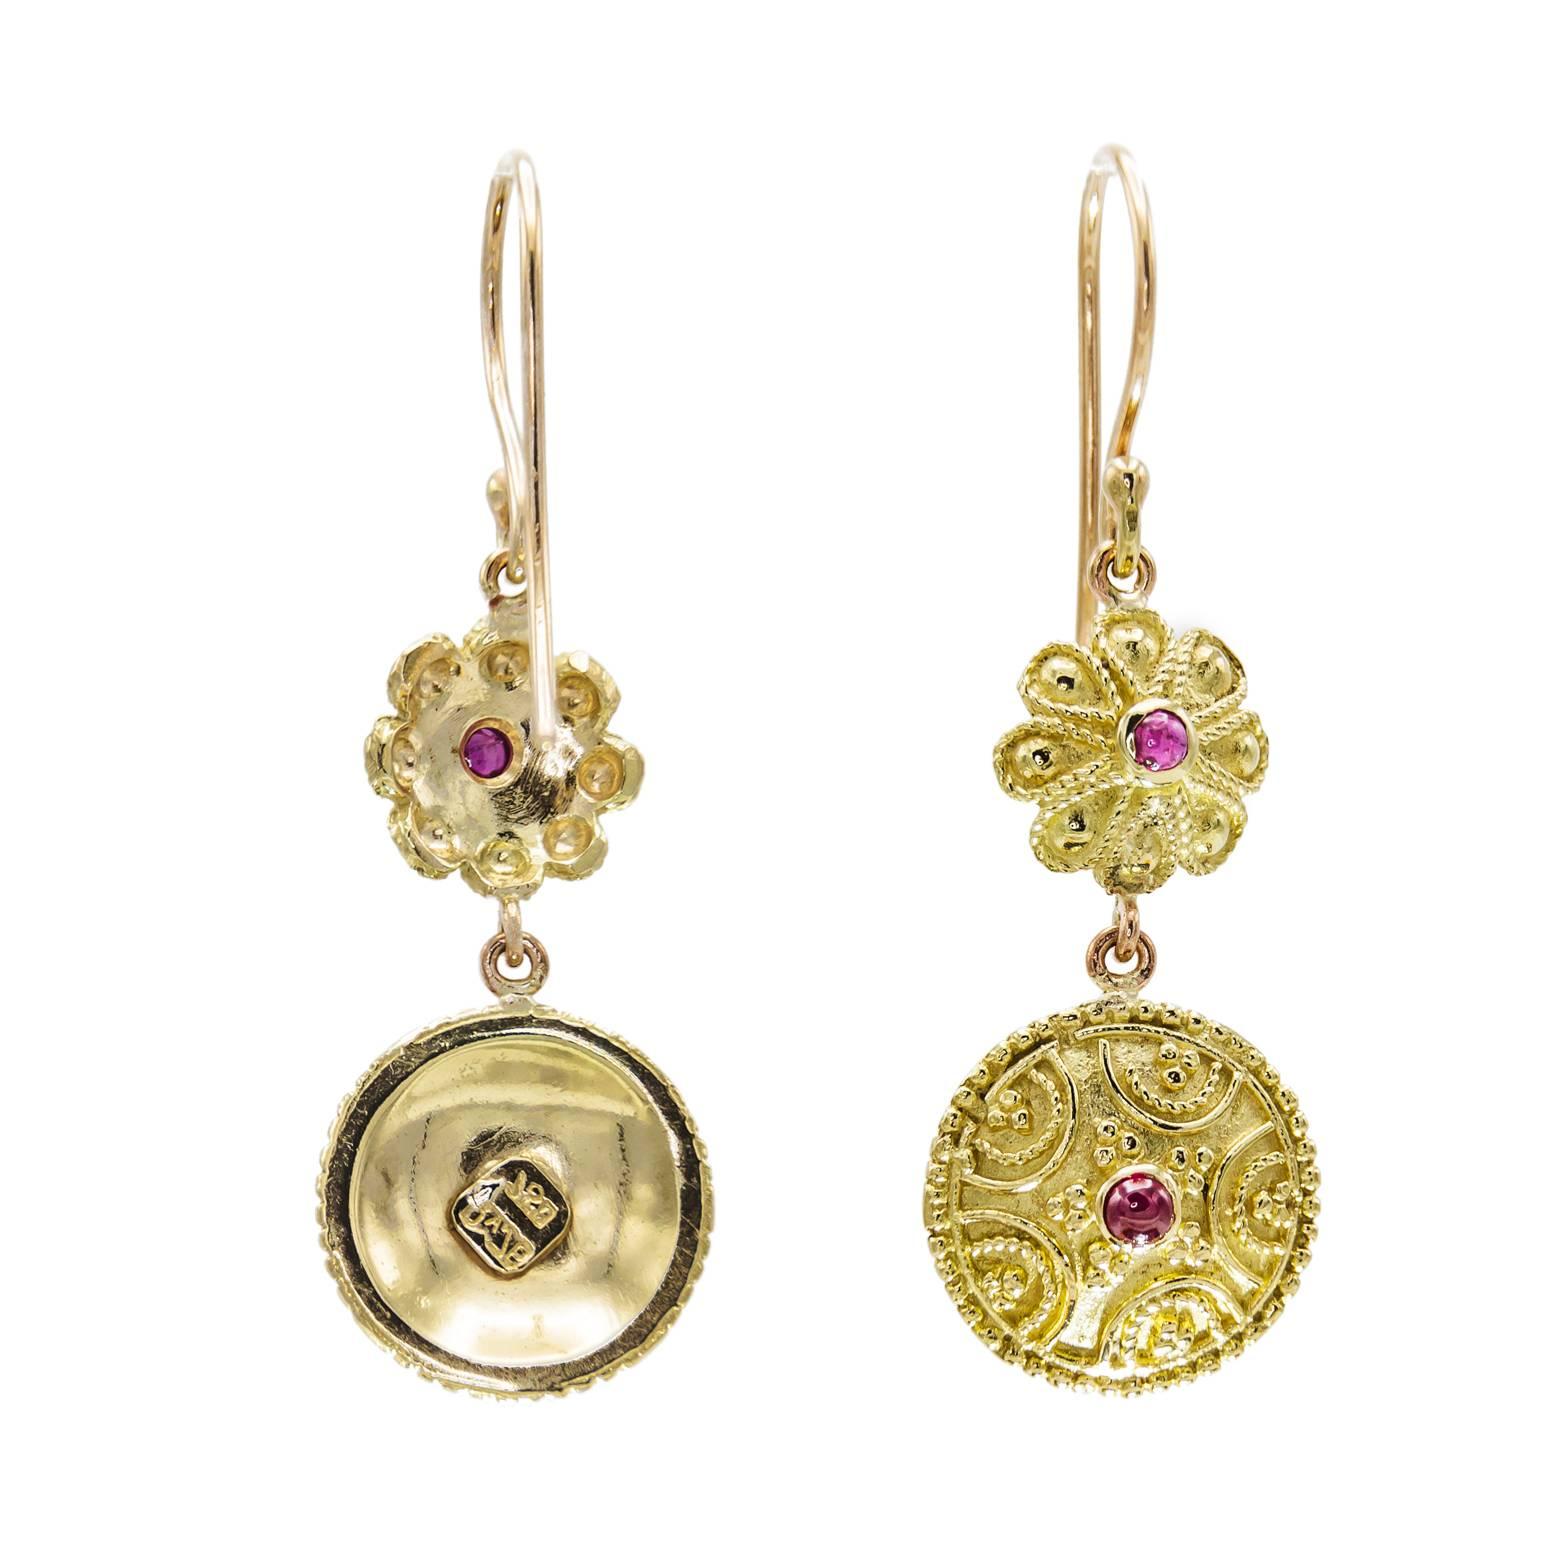 These beautifully engraved two part Ruby earrings are fun and fancy. The engraving is byzantine inspired elegant and feminine. The perfect gift for a special woman or for yourself.:))